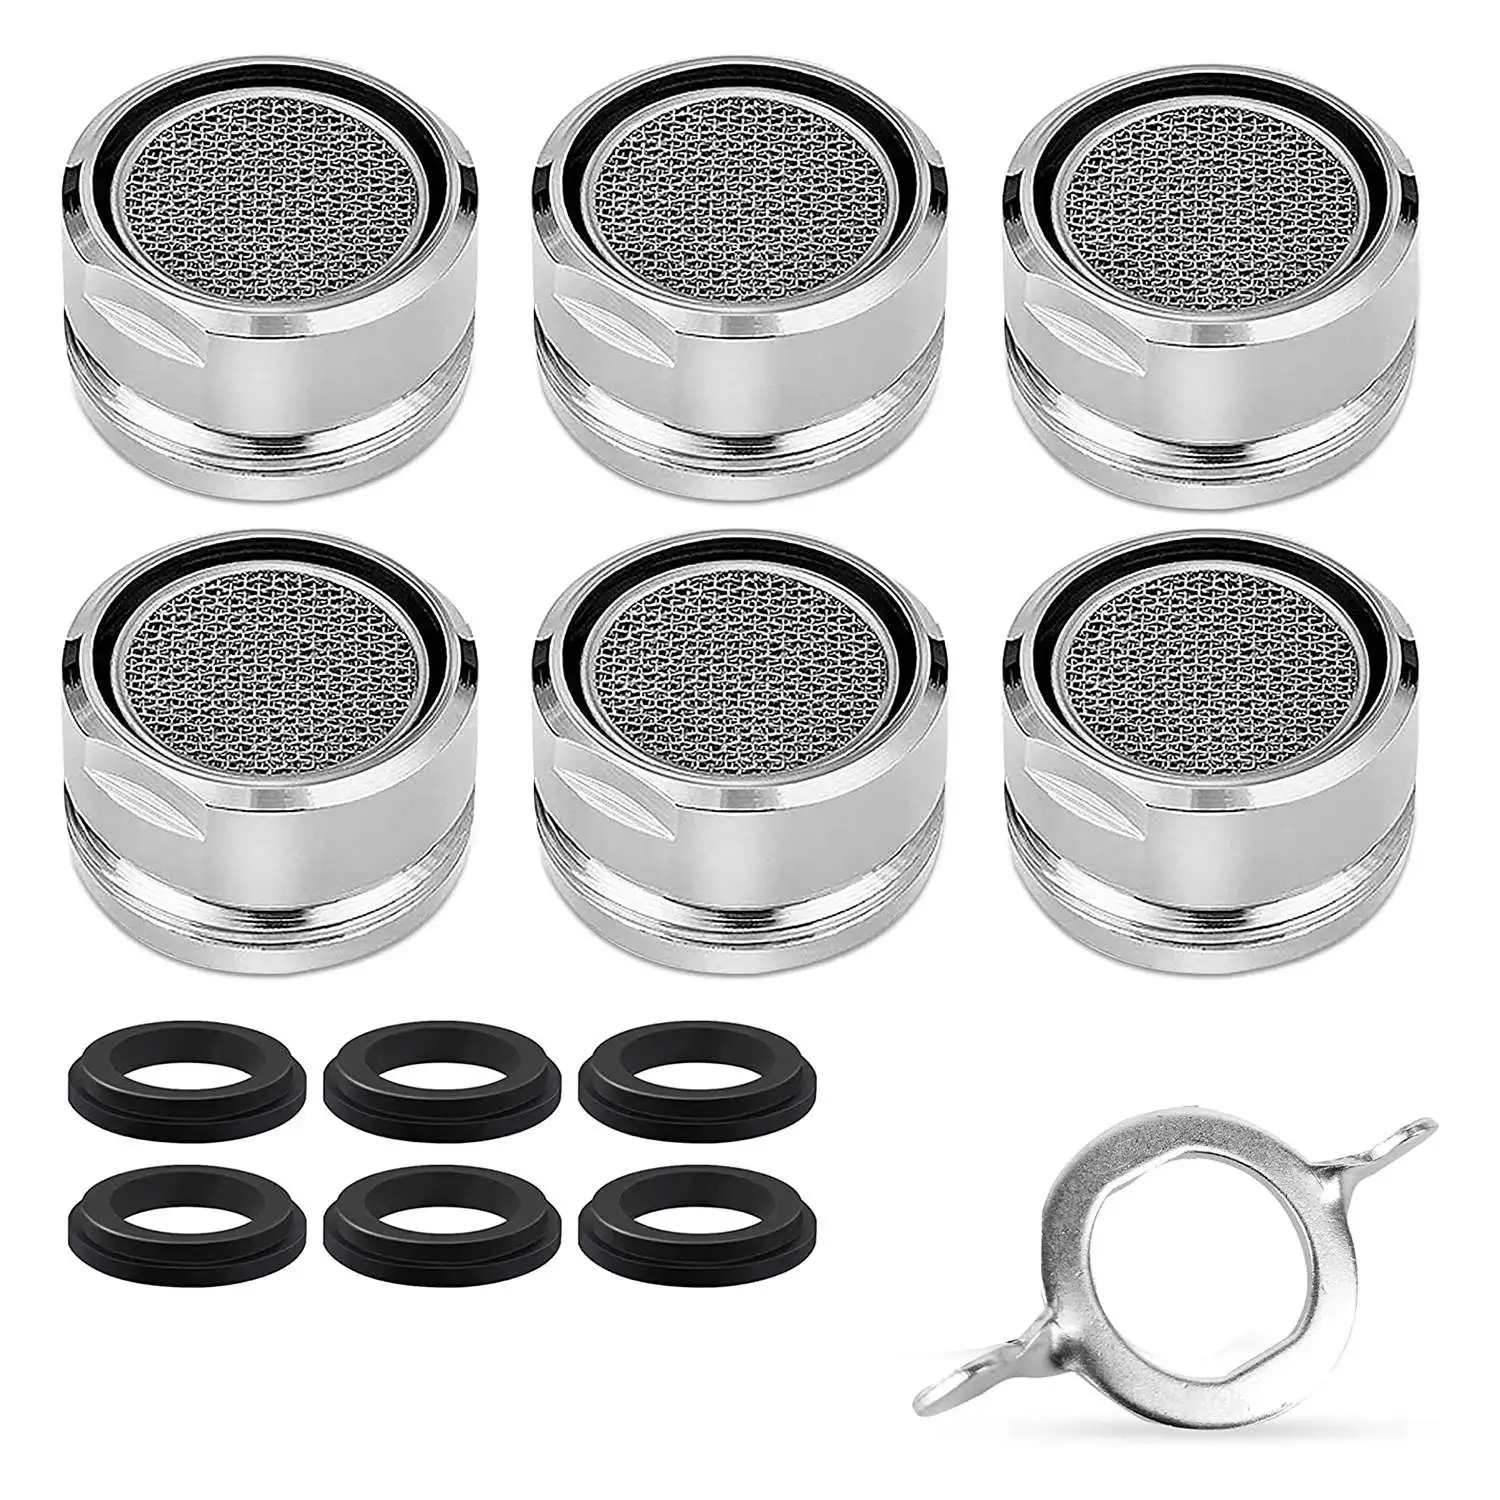 

6PCS M24 Tap Aerators with 6 High Quality Gaskets and 1 Chrome Keys Stainless Steel Aerator for Kitchen and